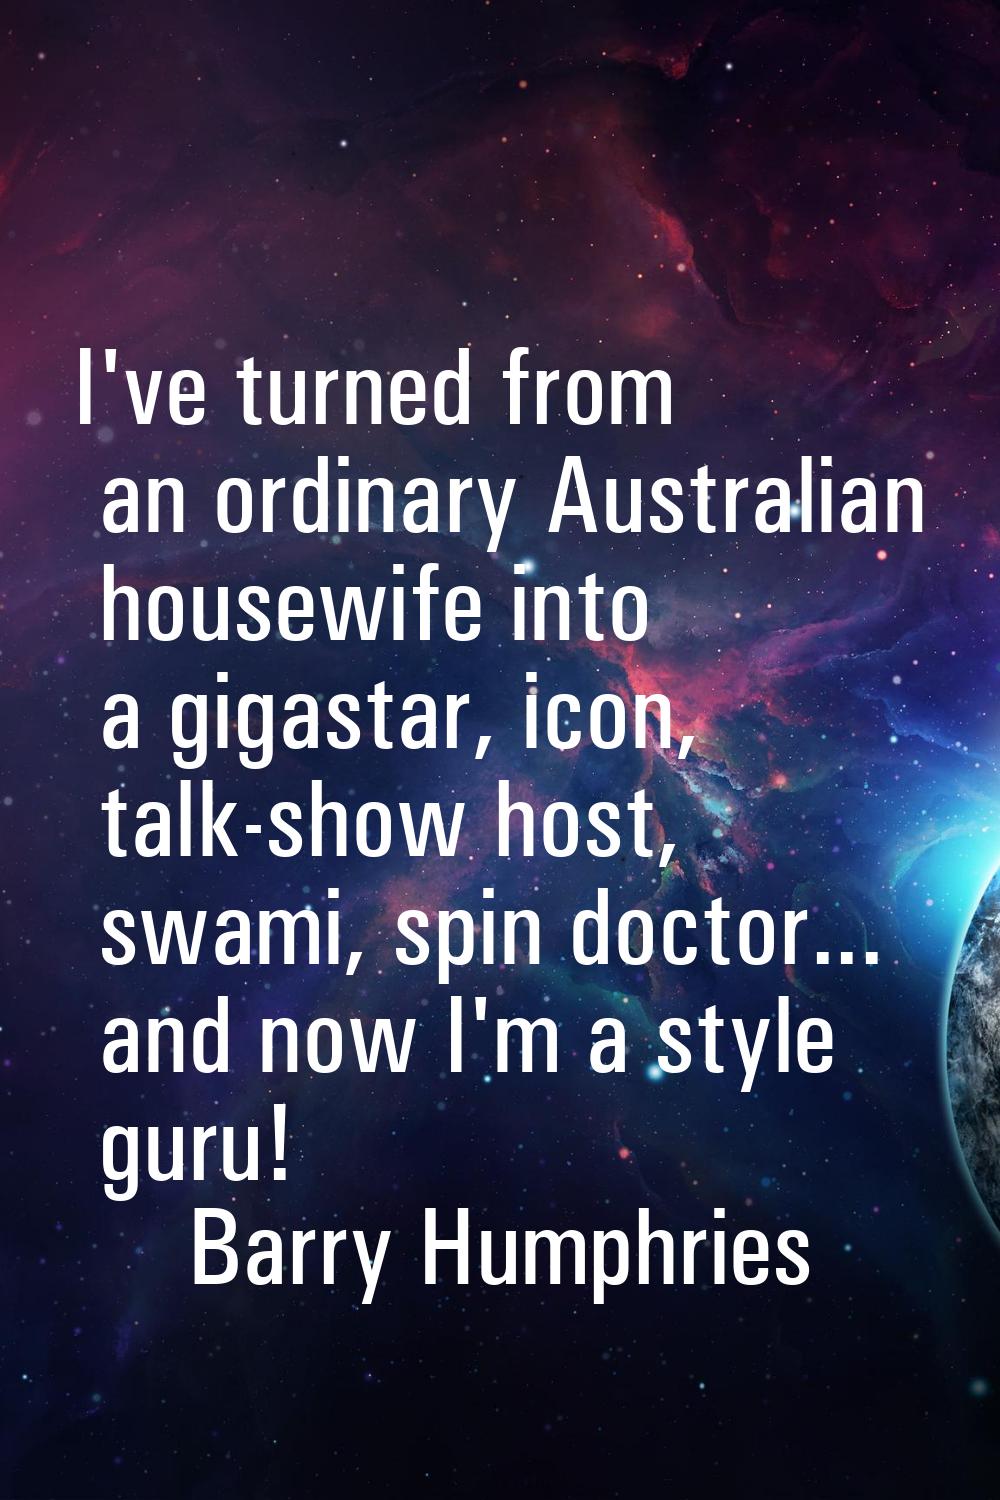 I've turned from an ordinary Australian housewife into a gigastar, icon, talk-show host, swami, spi